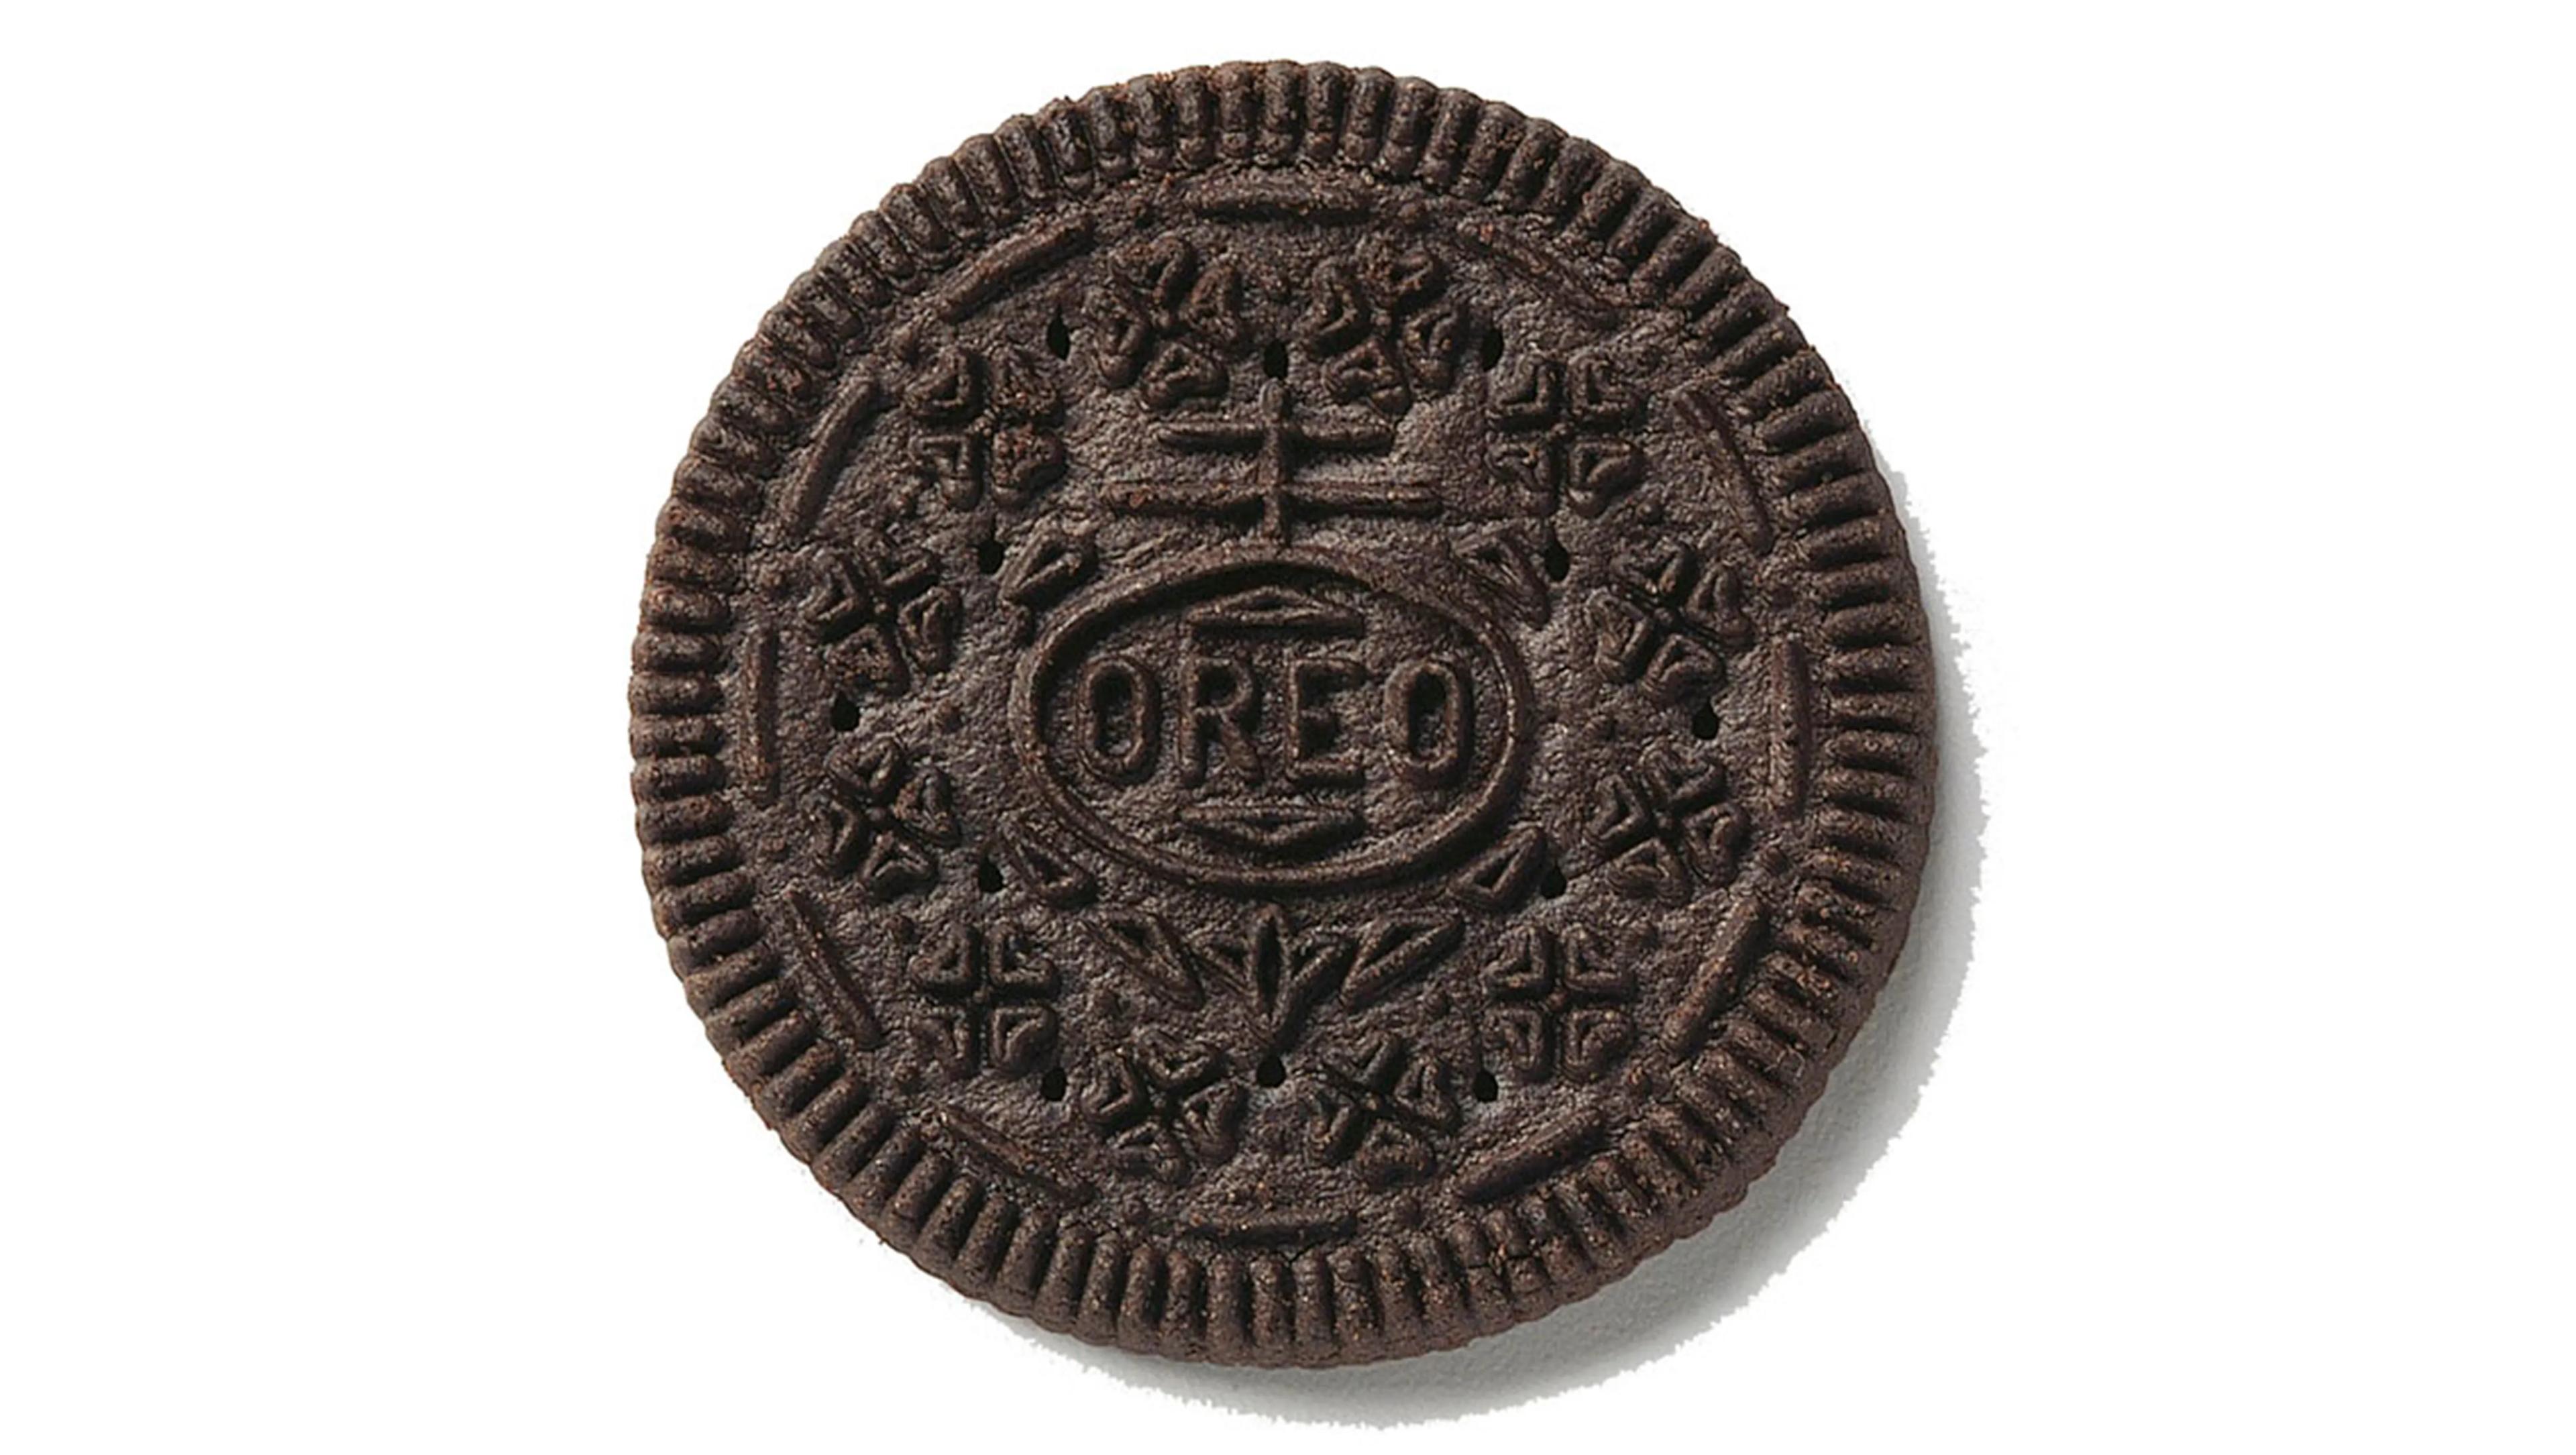 Oreo debuts Firework flavor, offers $500K for next cookie contest